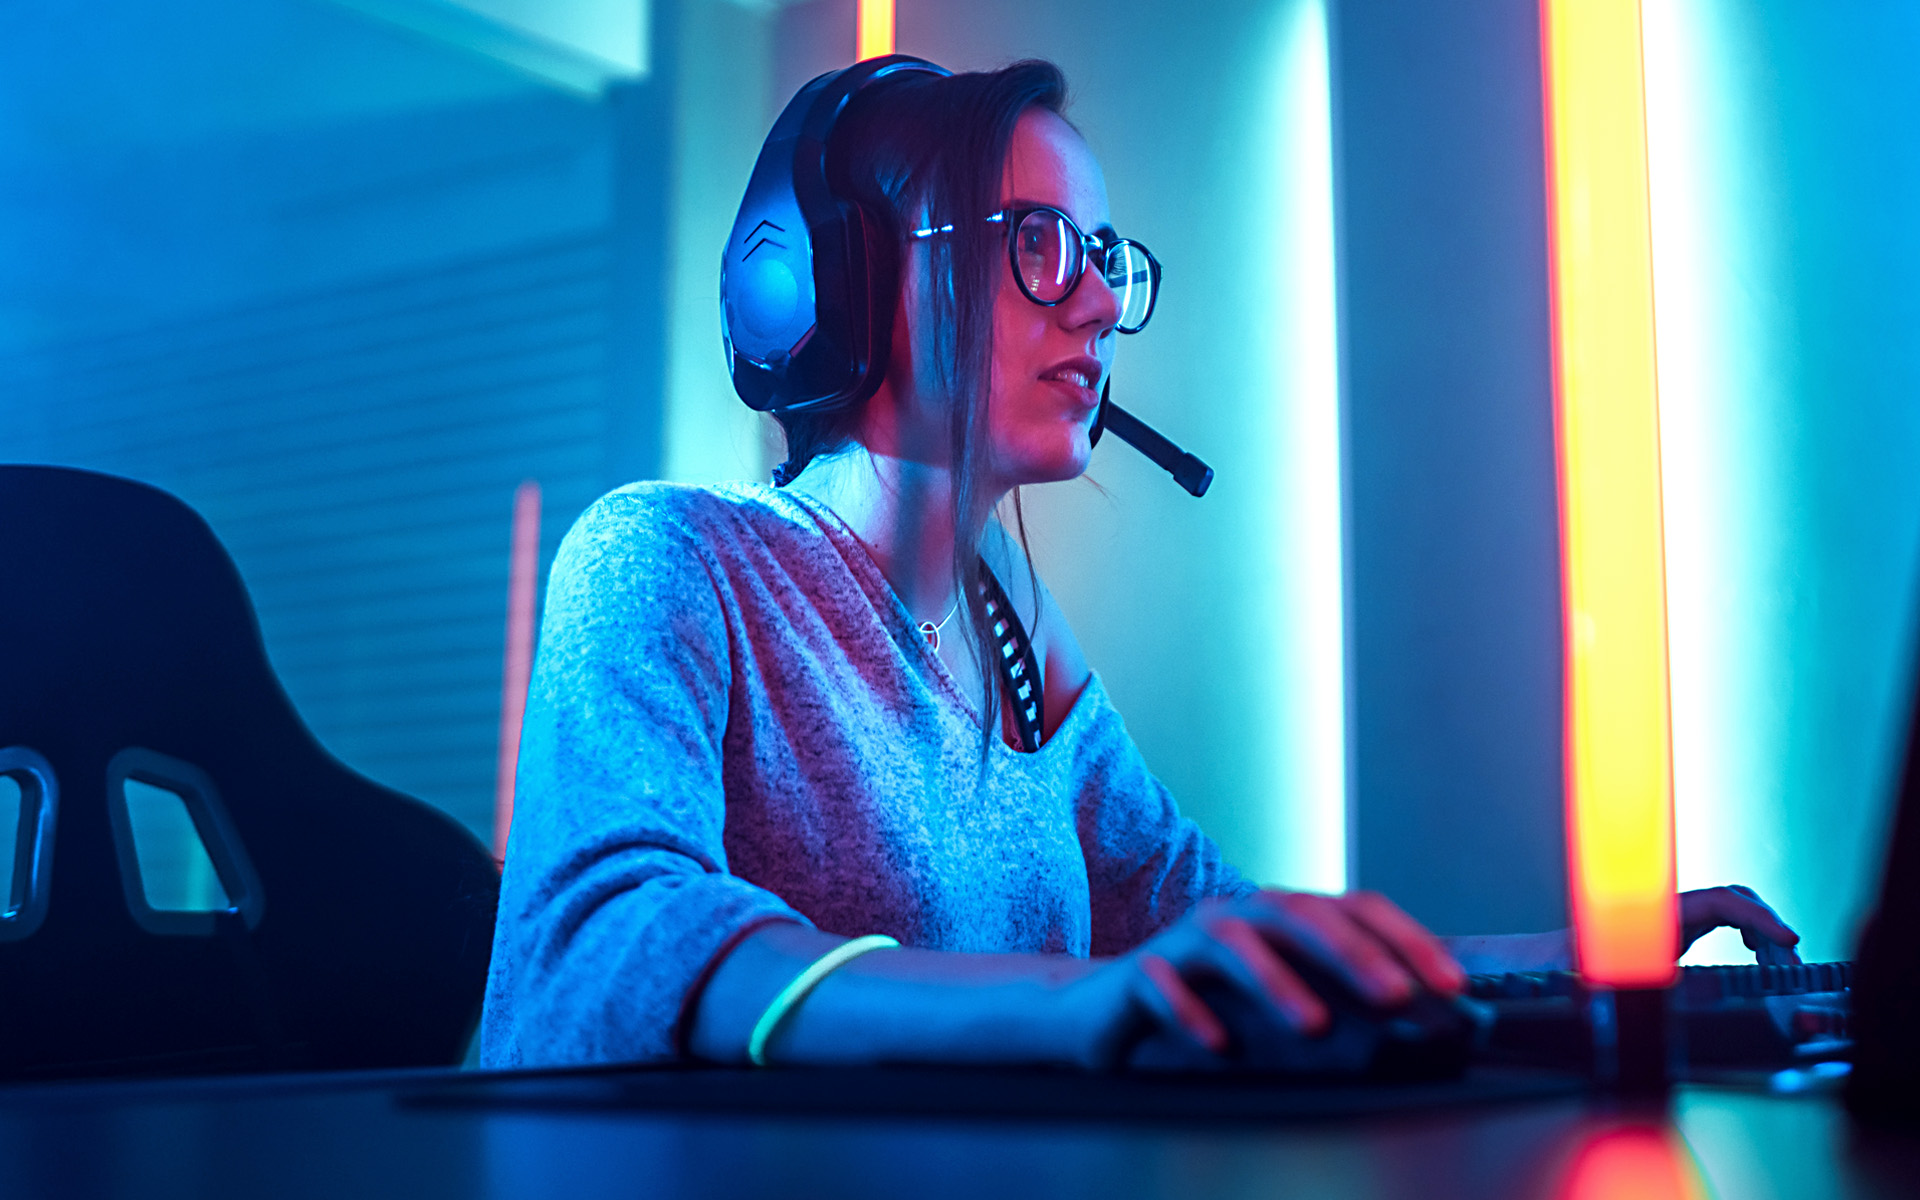 A woman plays a video game.